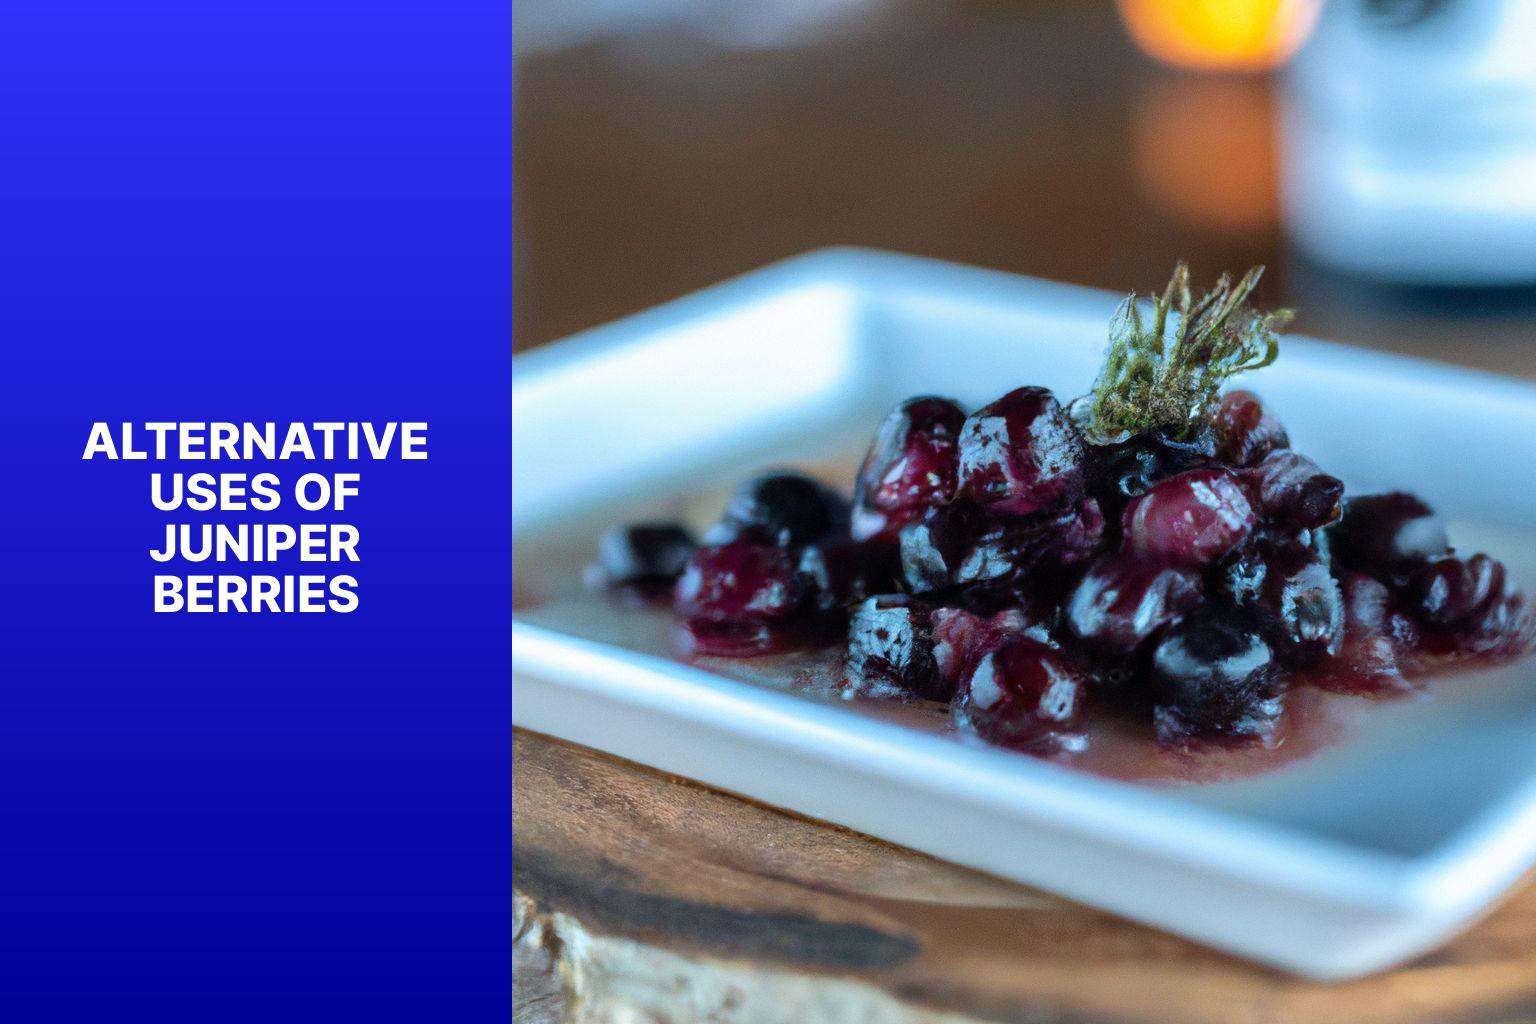 Alternative Uses of Juniper Berries - Juniper Berries in Culinary Uses: Discuss creative ways to incorporate juniper berries into cooking, such as in marinades, sauces, and more. 